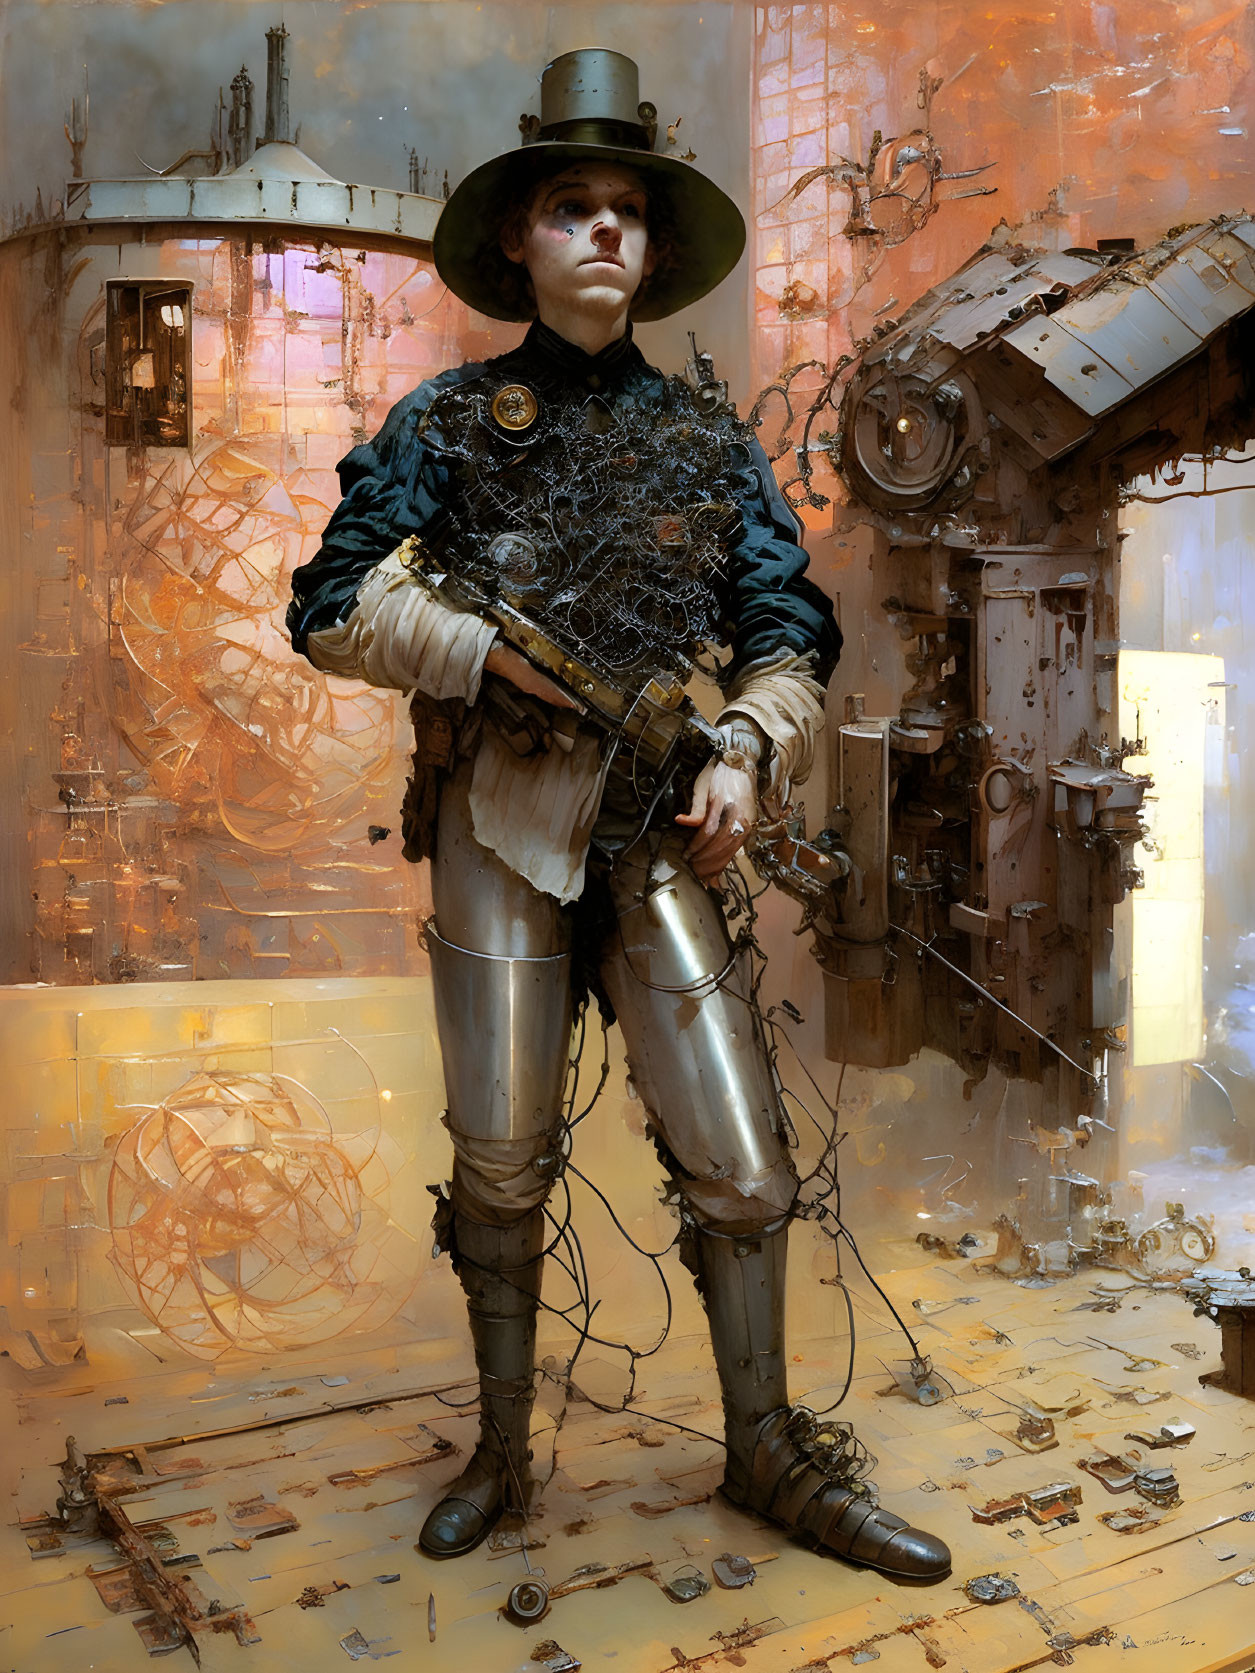 Steampunk-inspired character with wide-brimmed hat and metallic leg armor among mechanical debris.